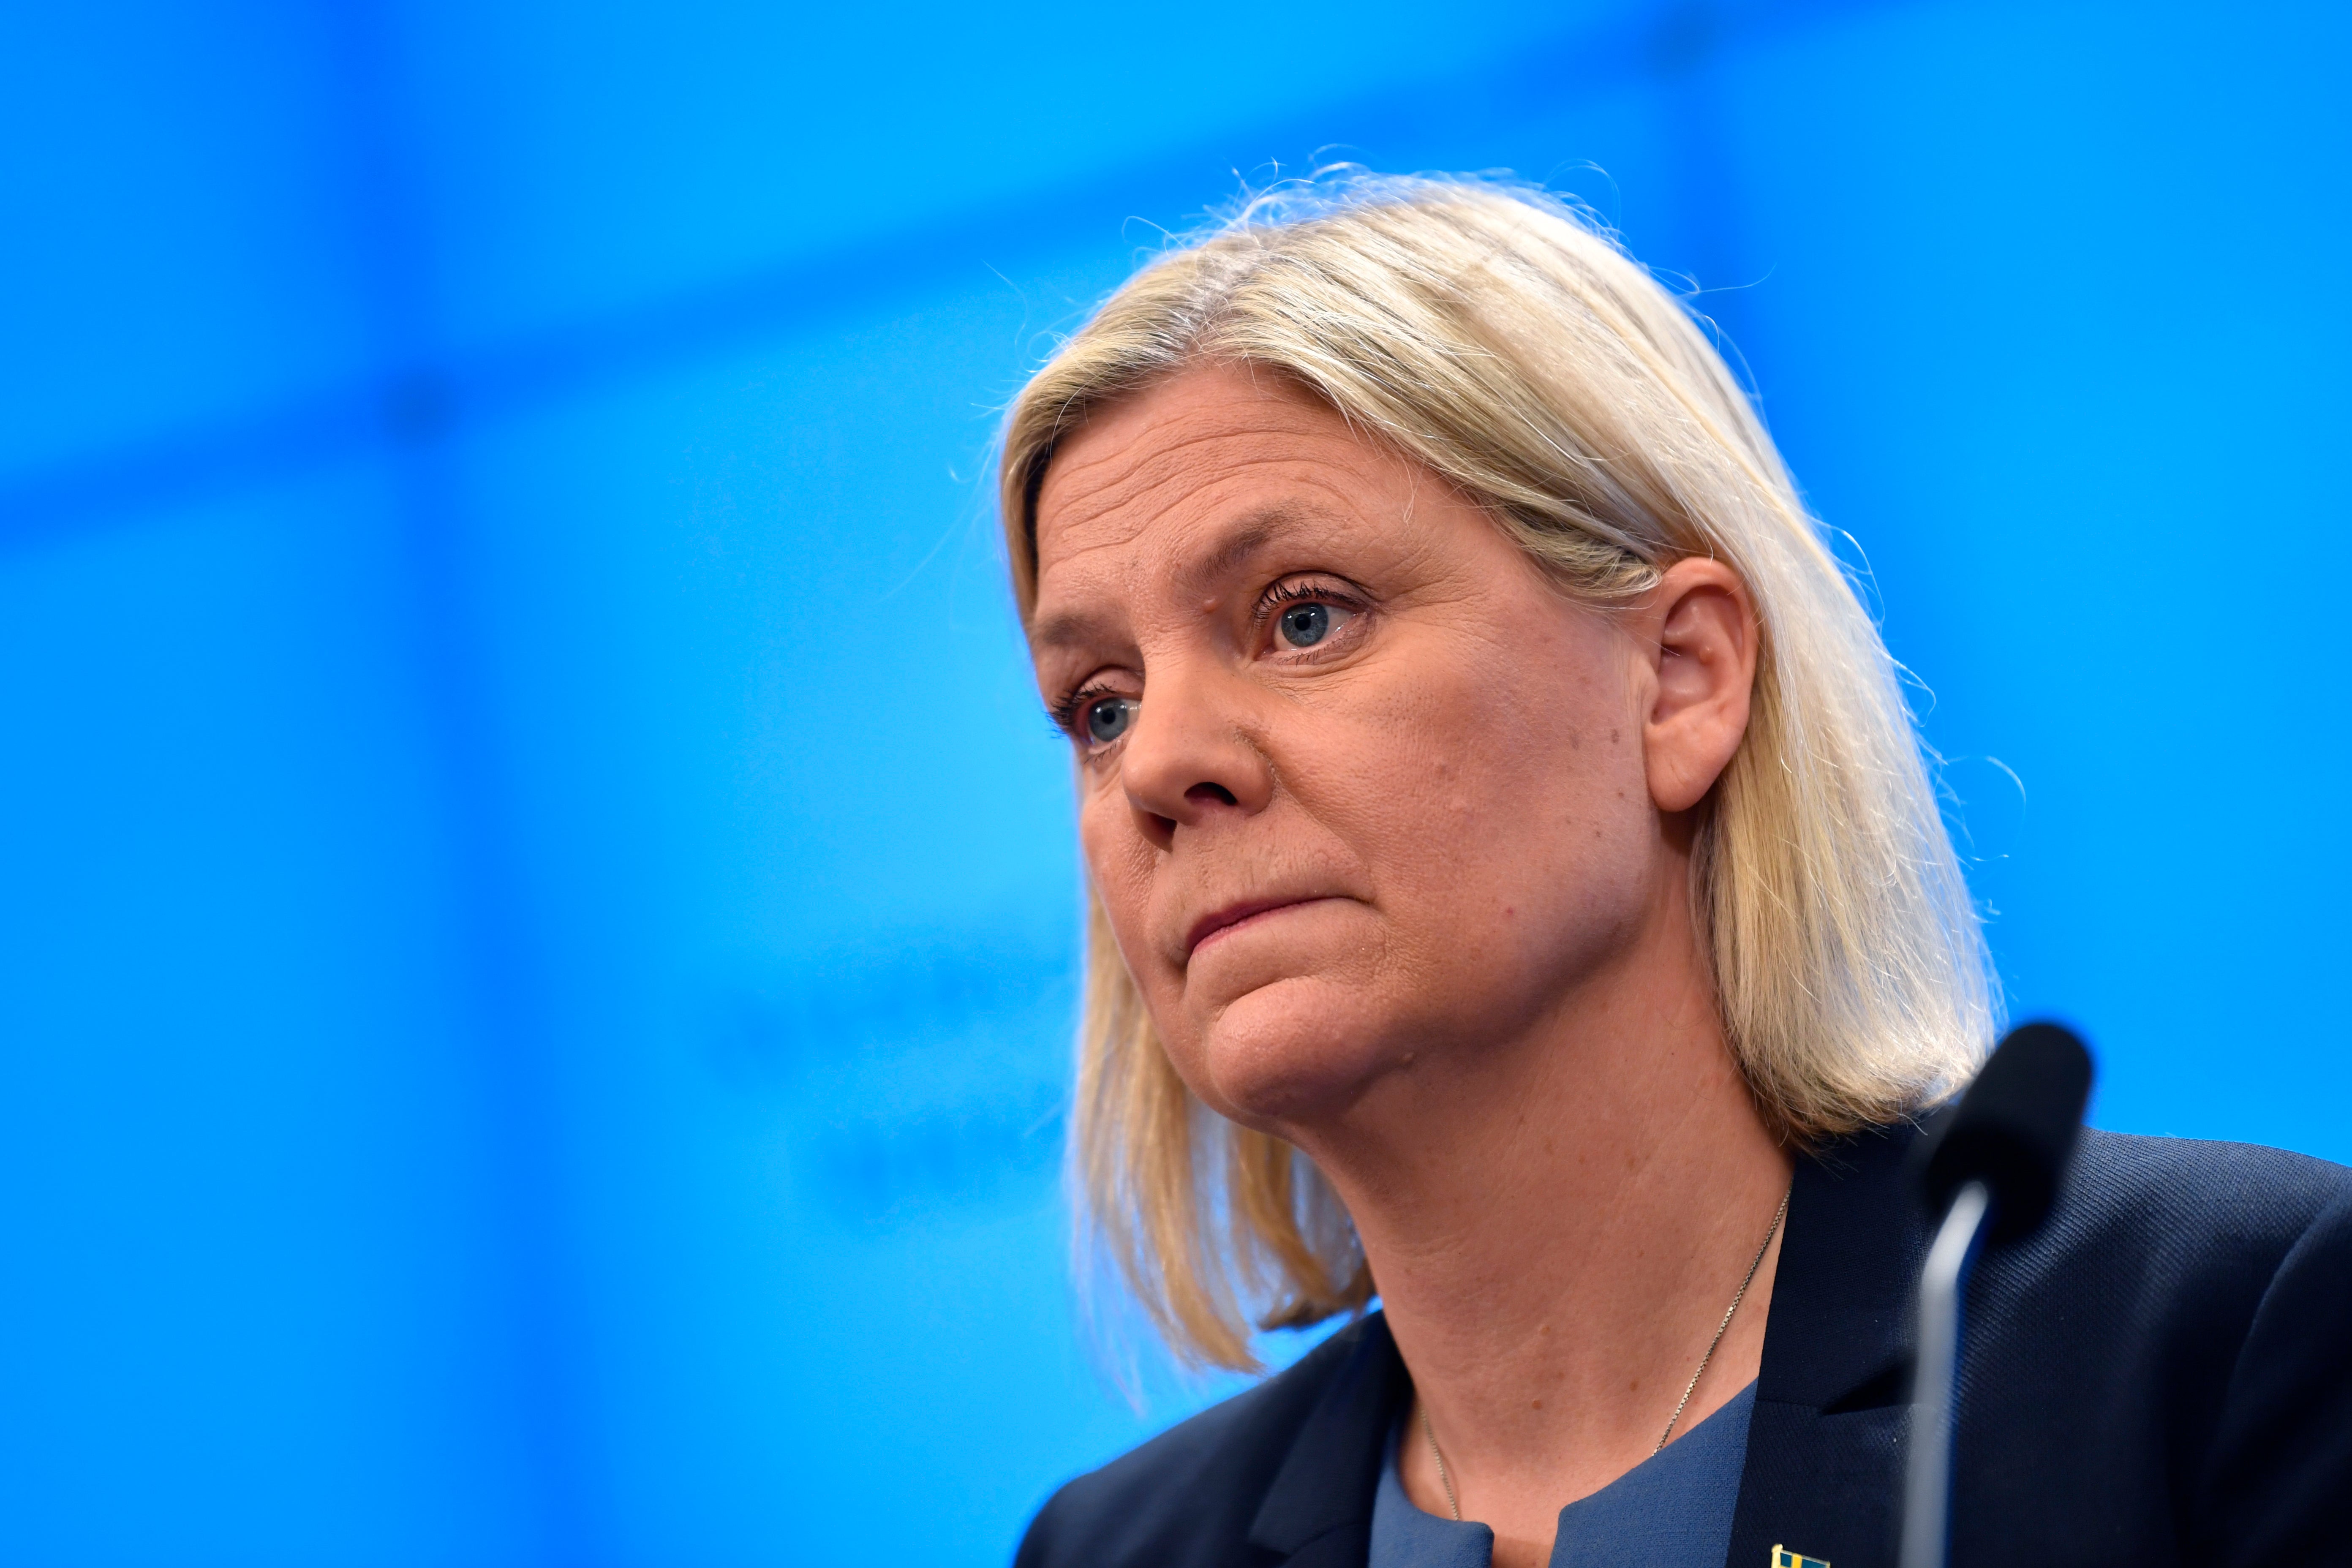 Magdalena Andersson resigned hours after her appointment on Wednesday